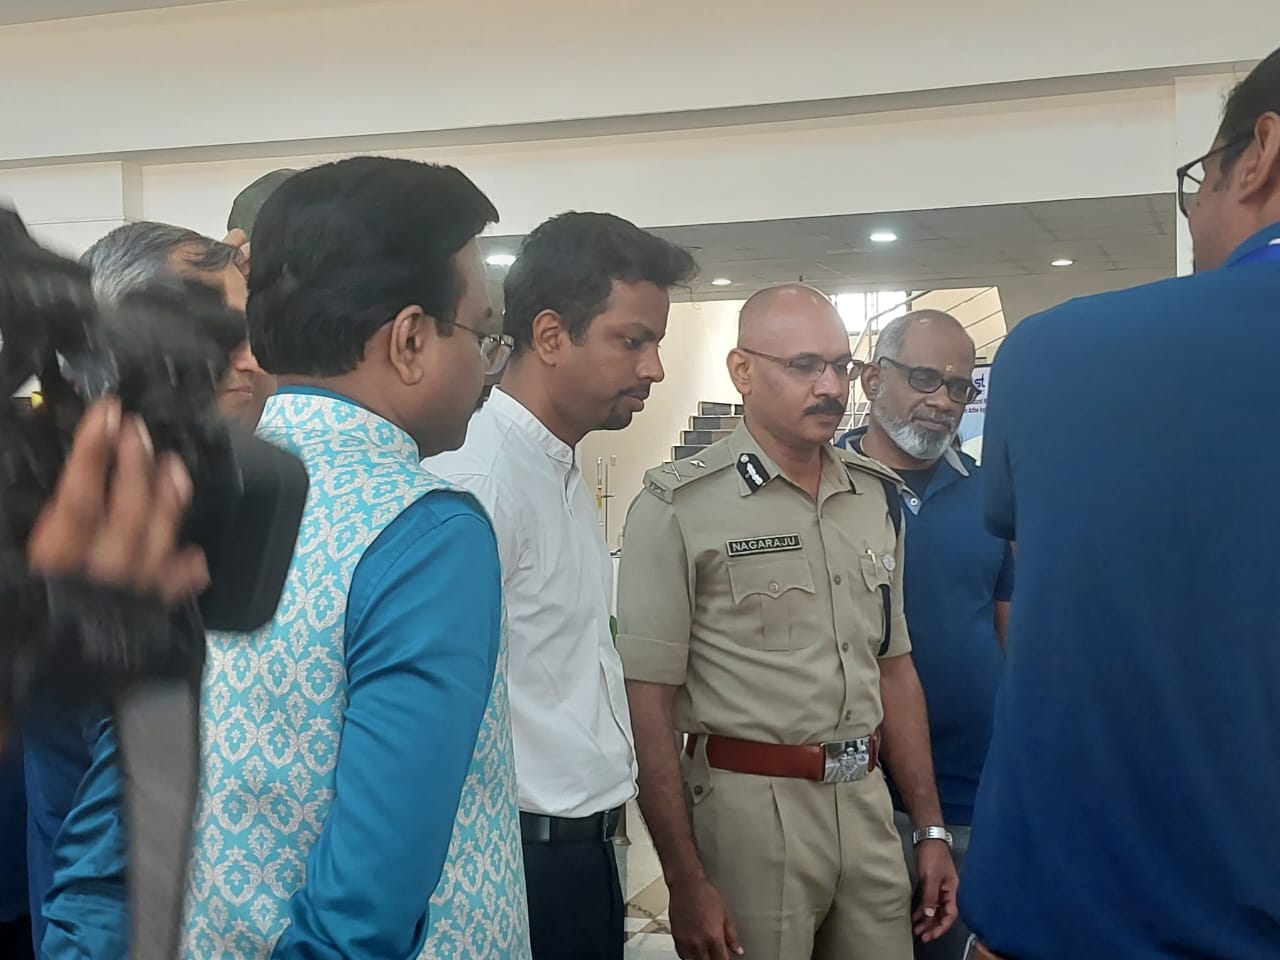 Geromic George IAS District Collector, Trivandrum and Nagaraju Chakilam IPS Commissioner of Police, Trivandrum City inaugurated the final day event of OWOL, 'Open Day'